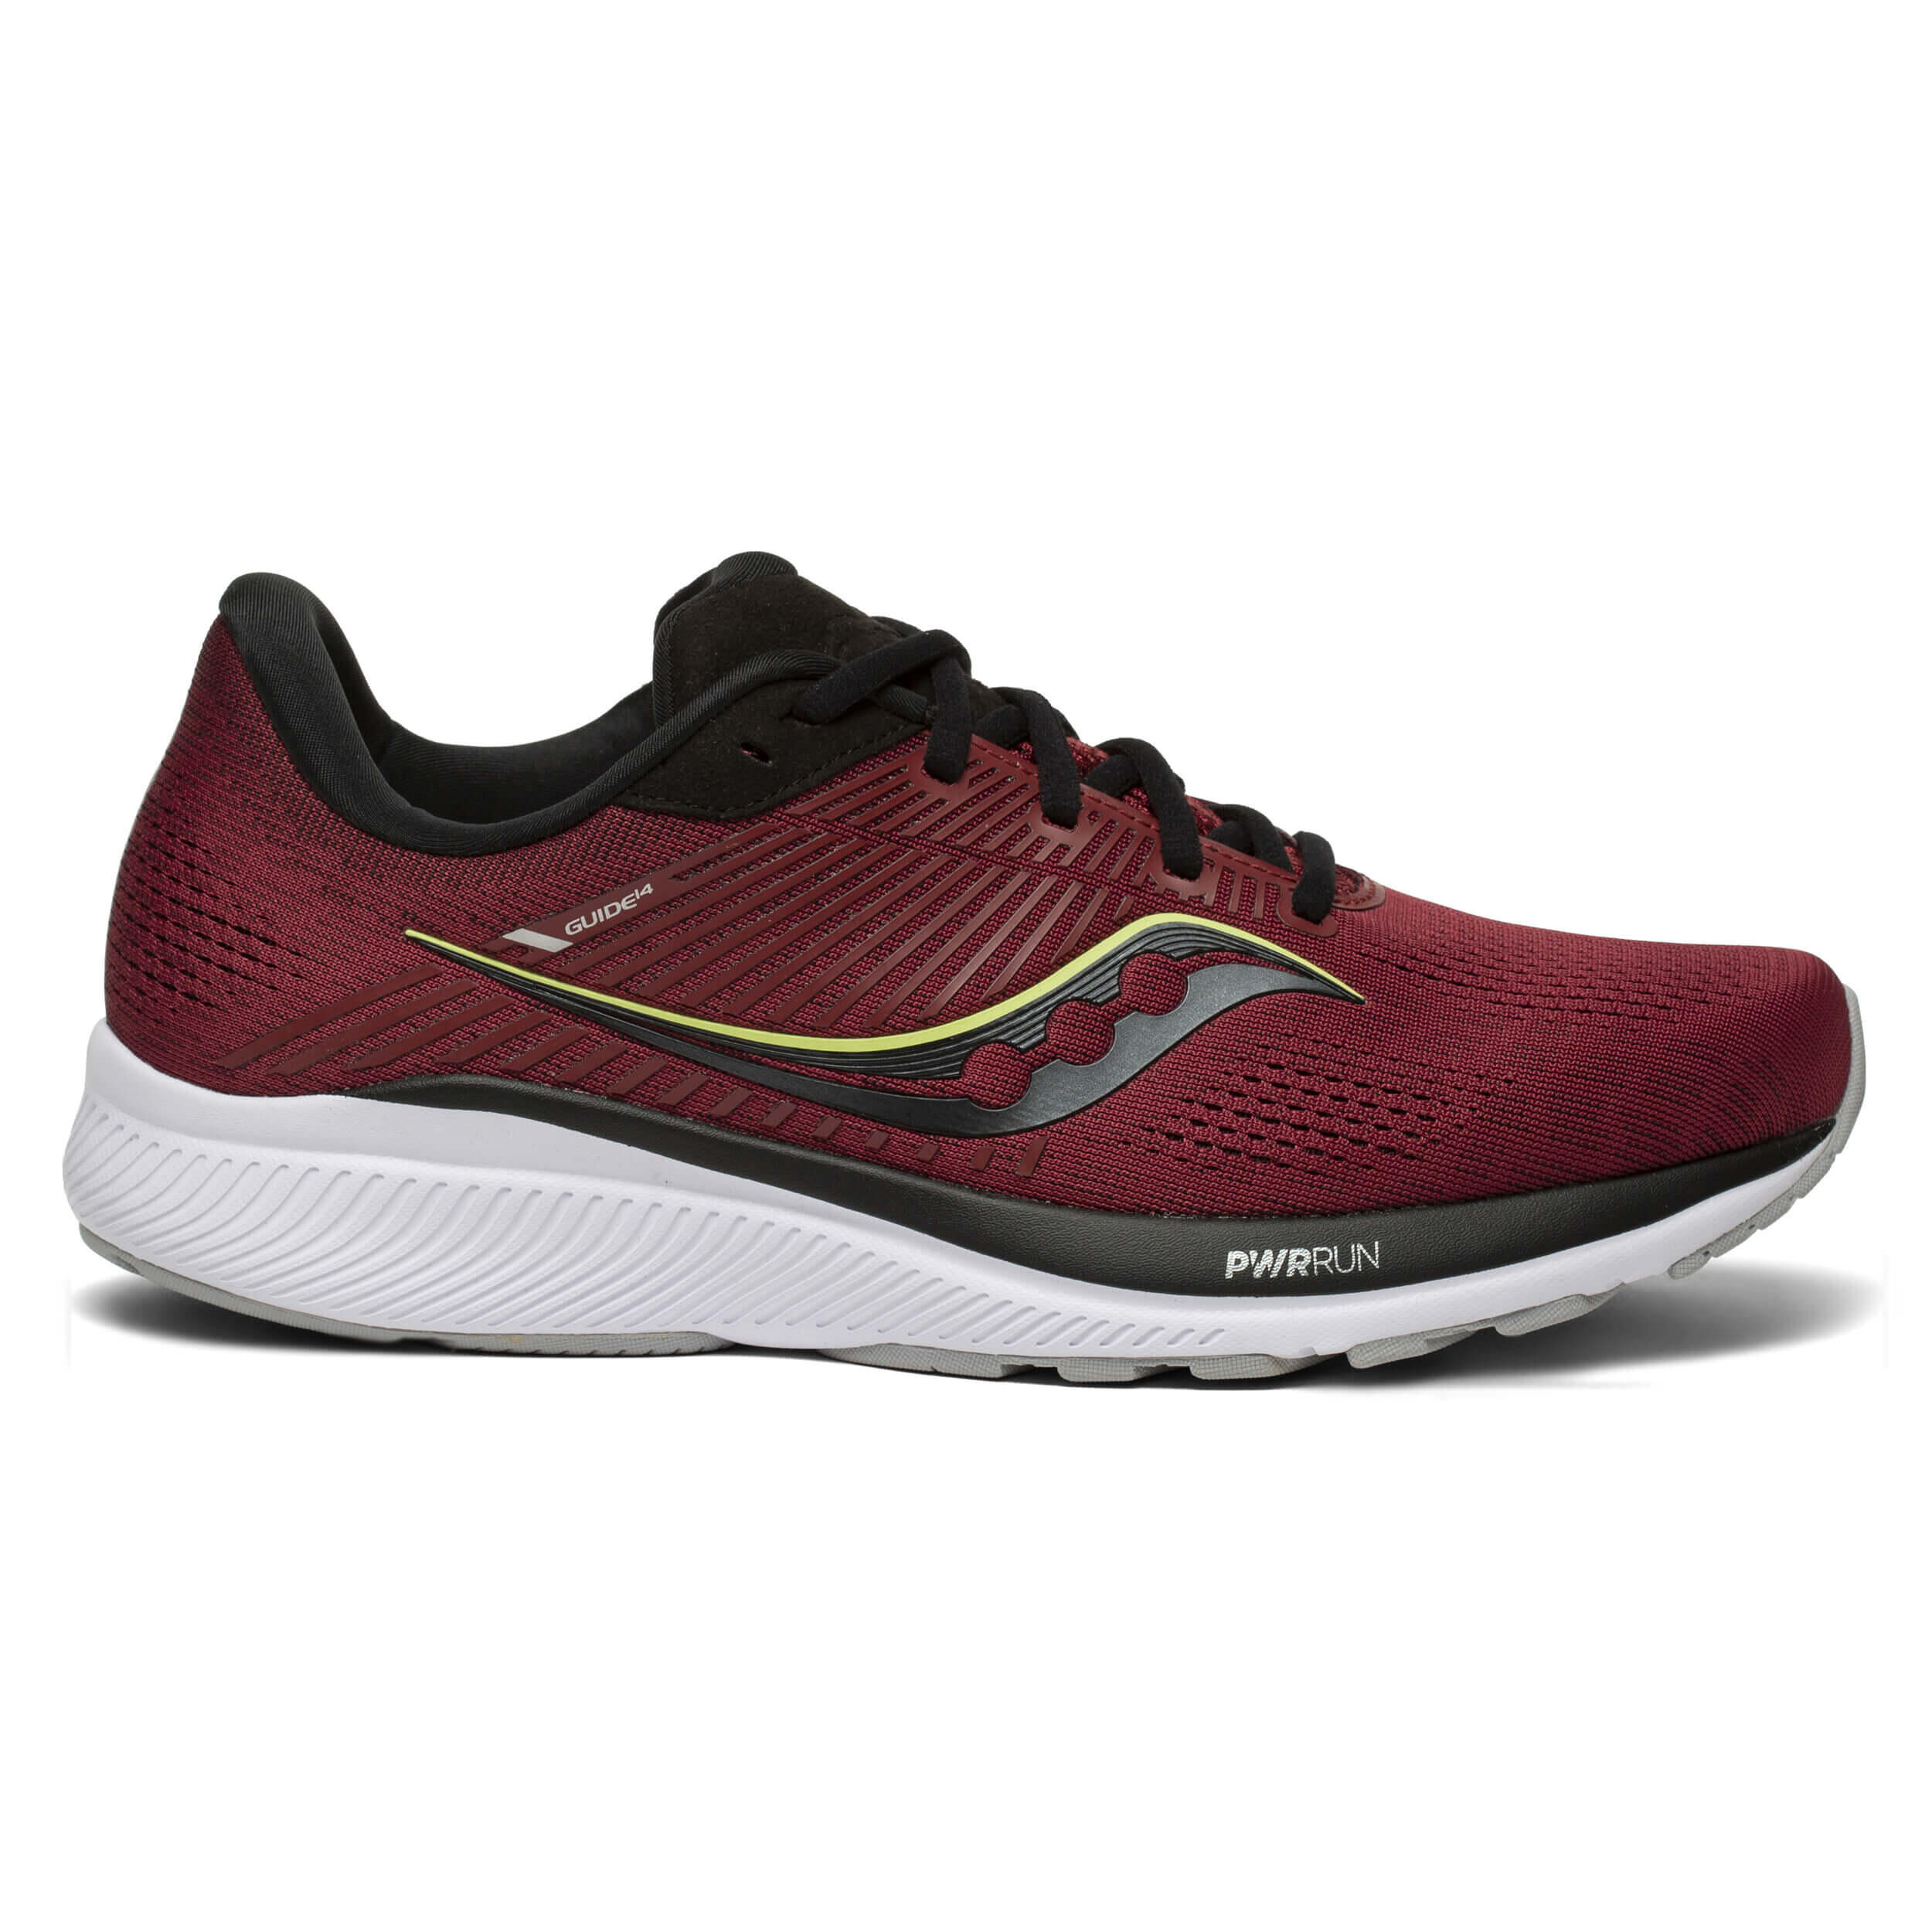 SAUCONY Saucony Guide 14 Mens Shoe  Mulberry/Lime